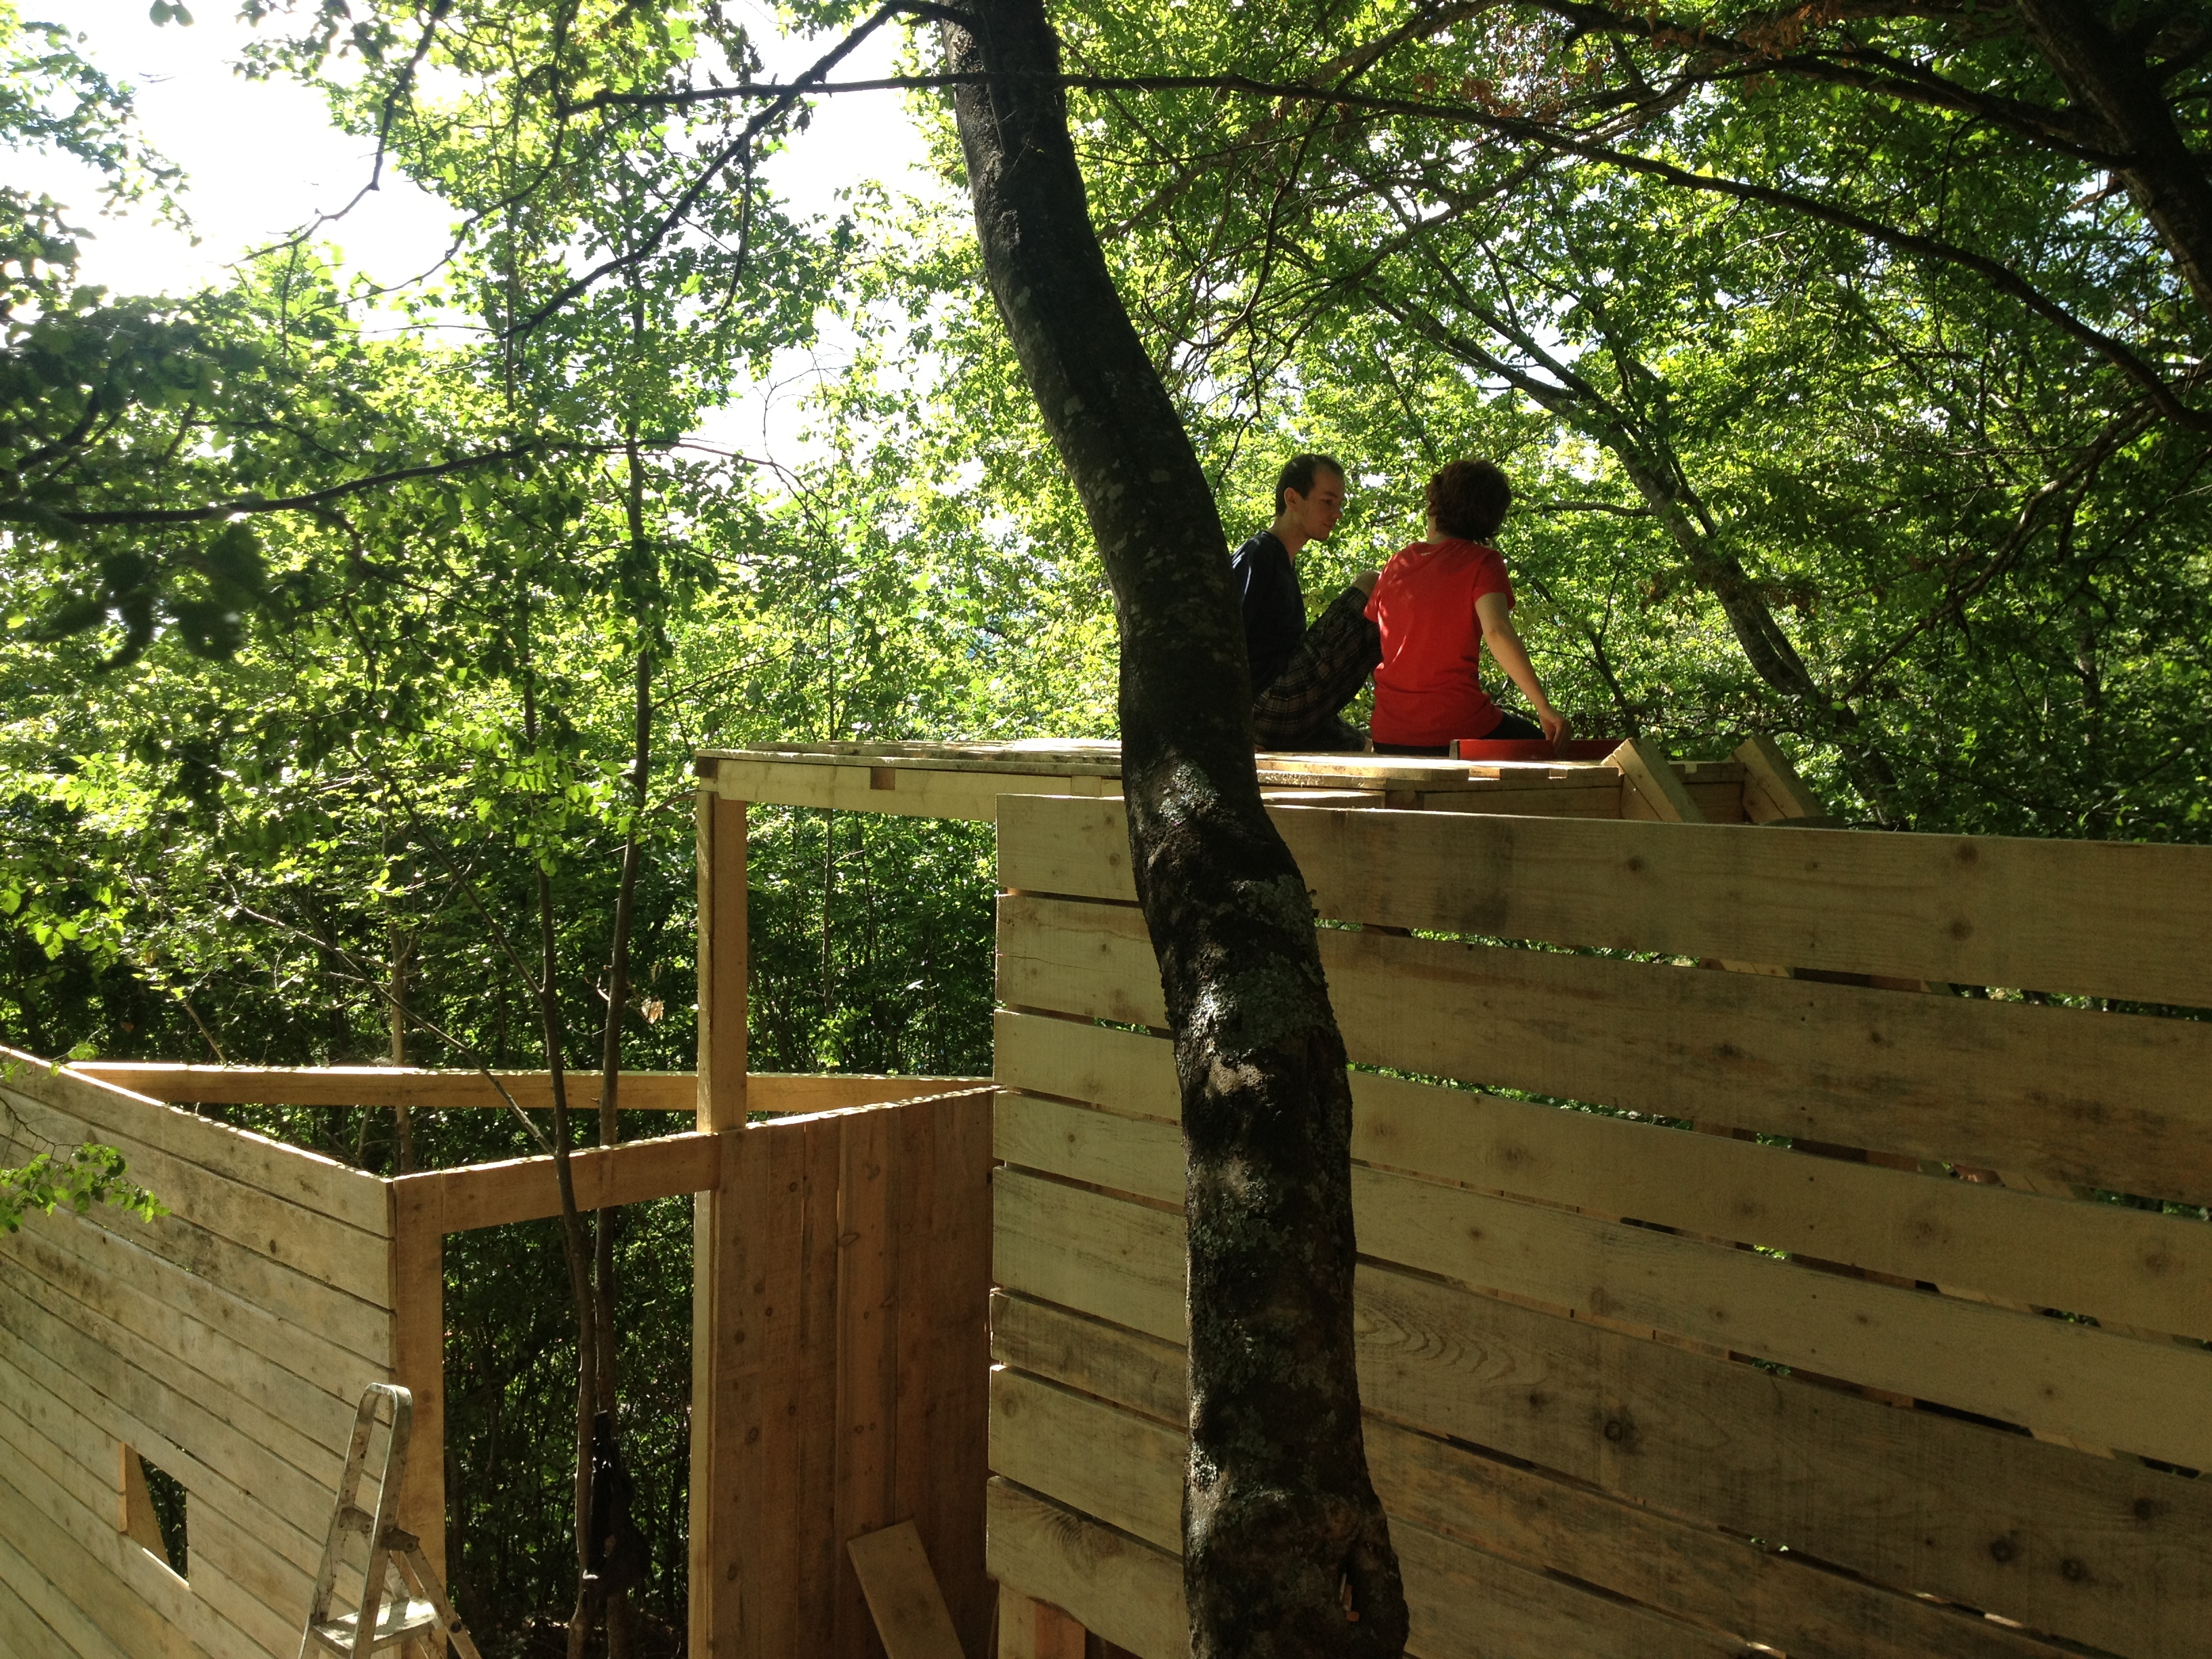 Chapel for Nature small architecture for togetherness designed and built for the occasion of the Summer School of 2014